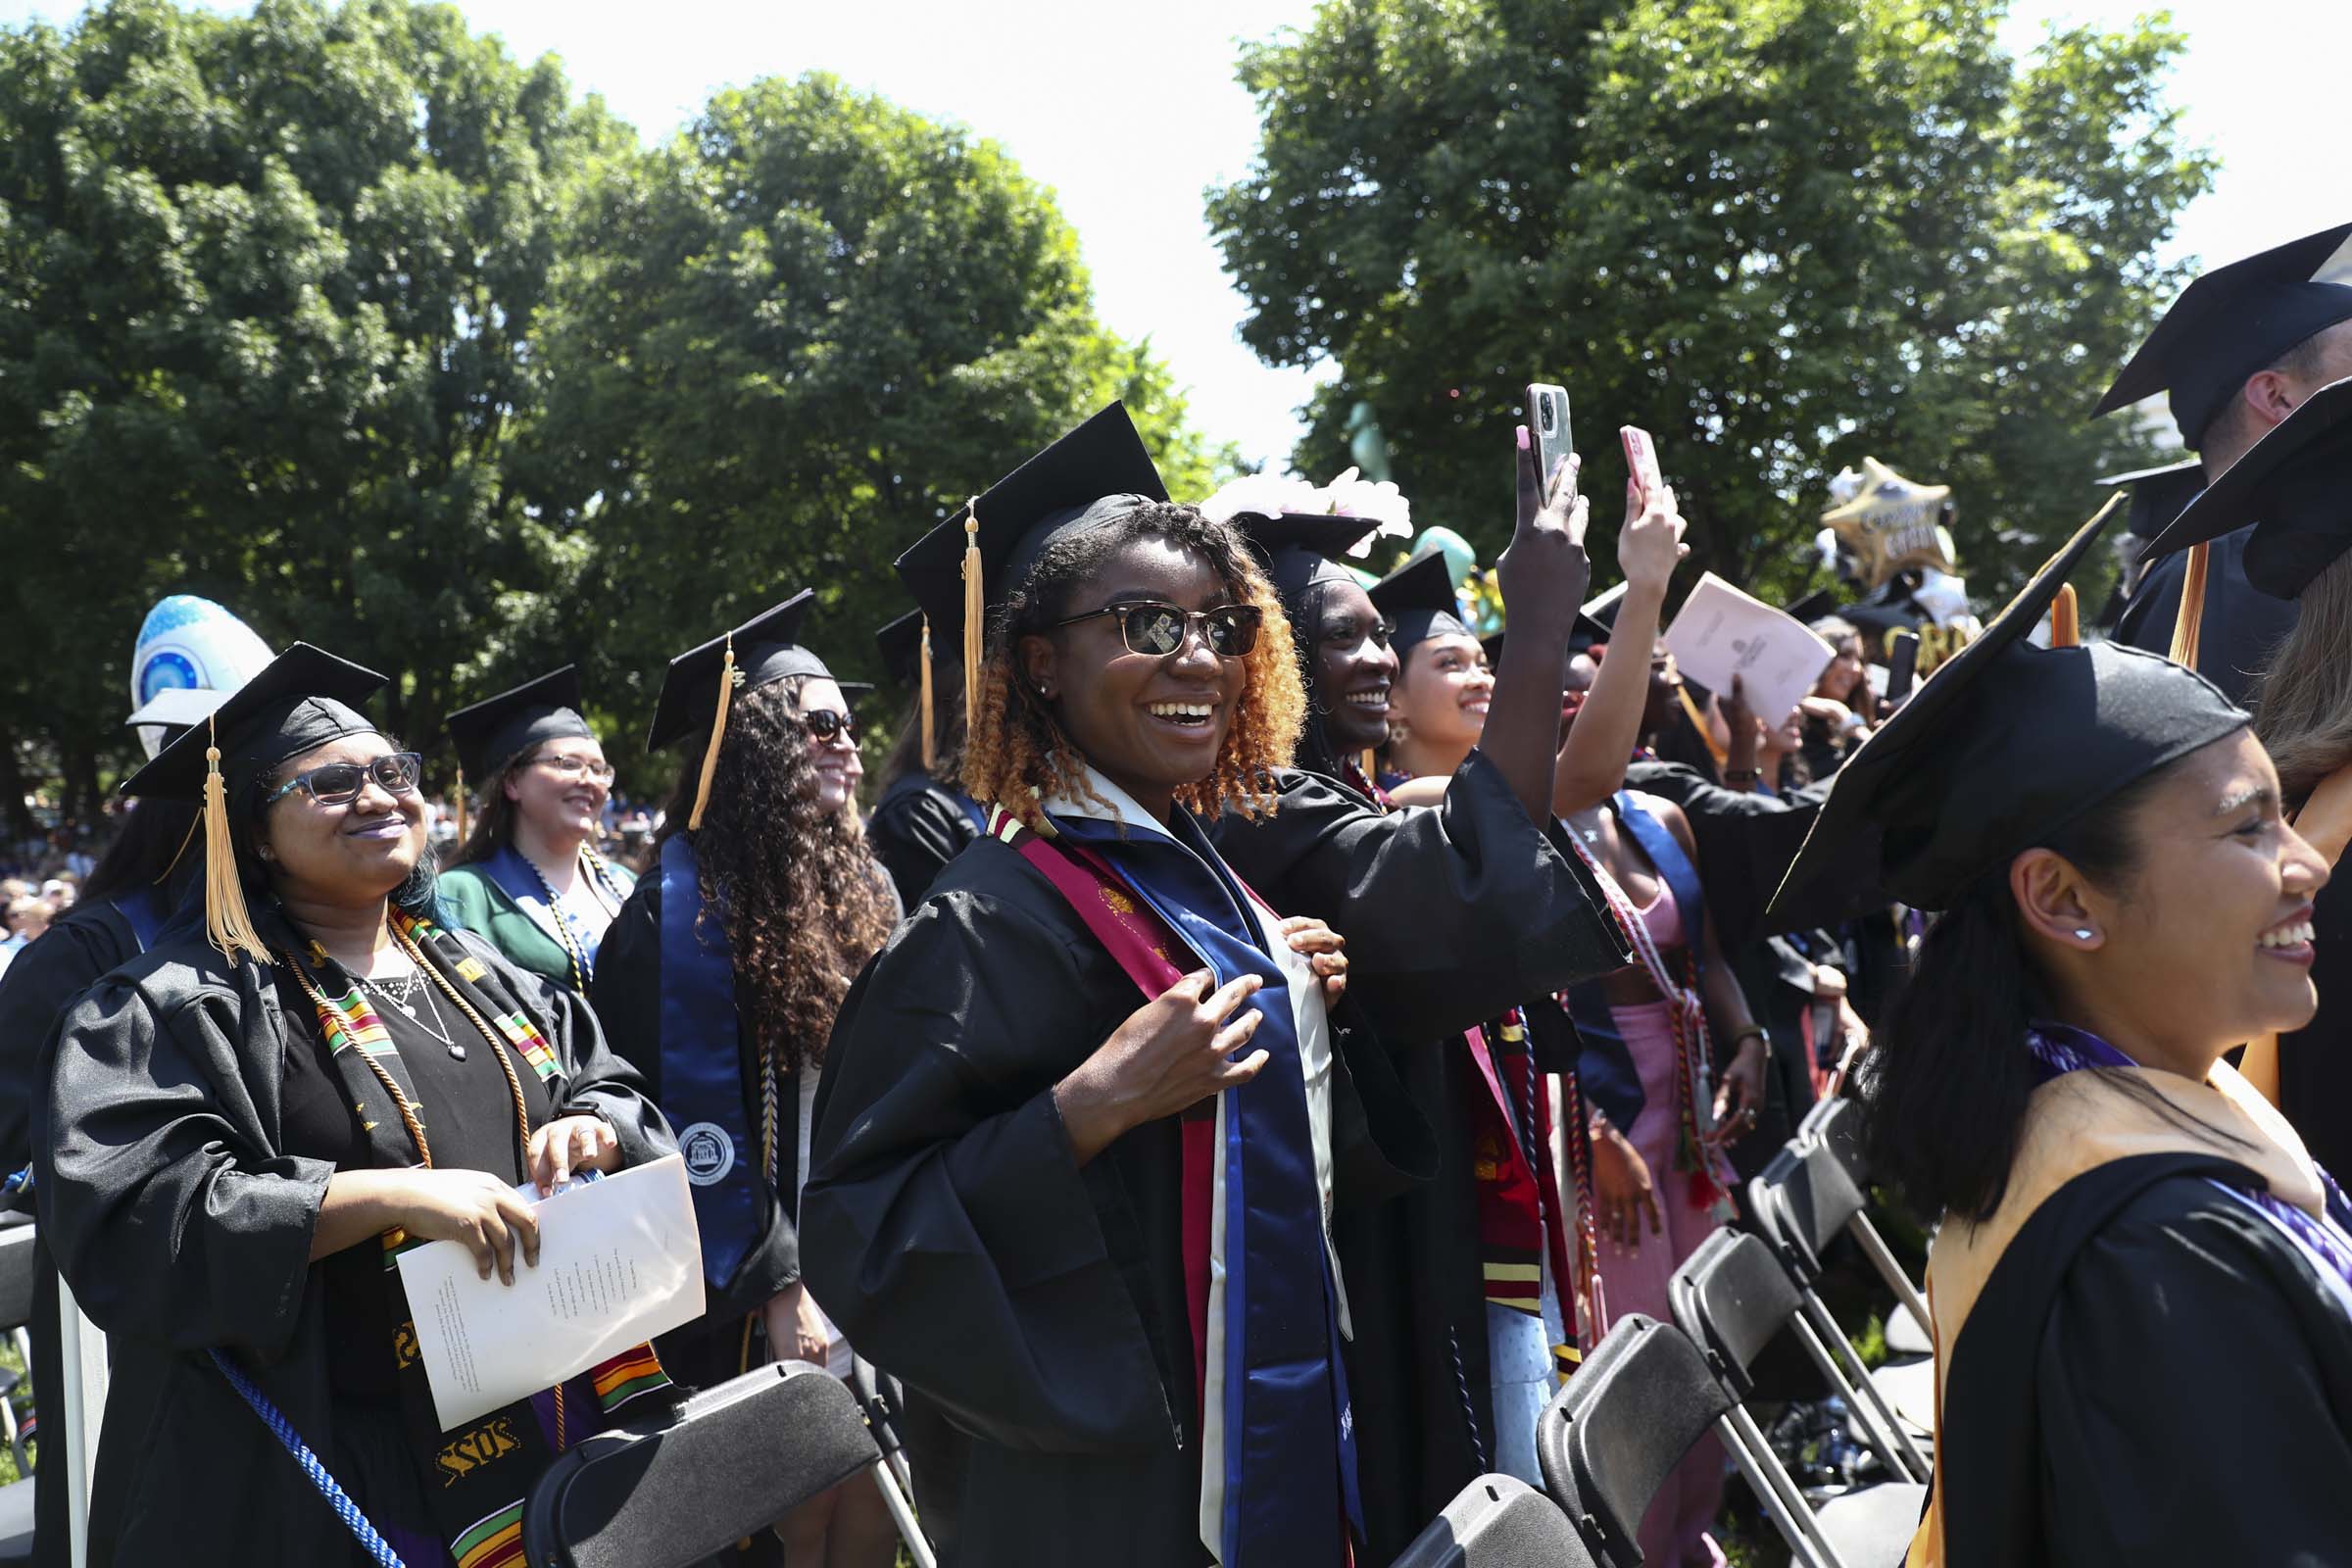 A student beams a smile and shows off her graduation sashes while raising her hand.